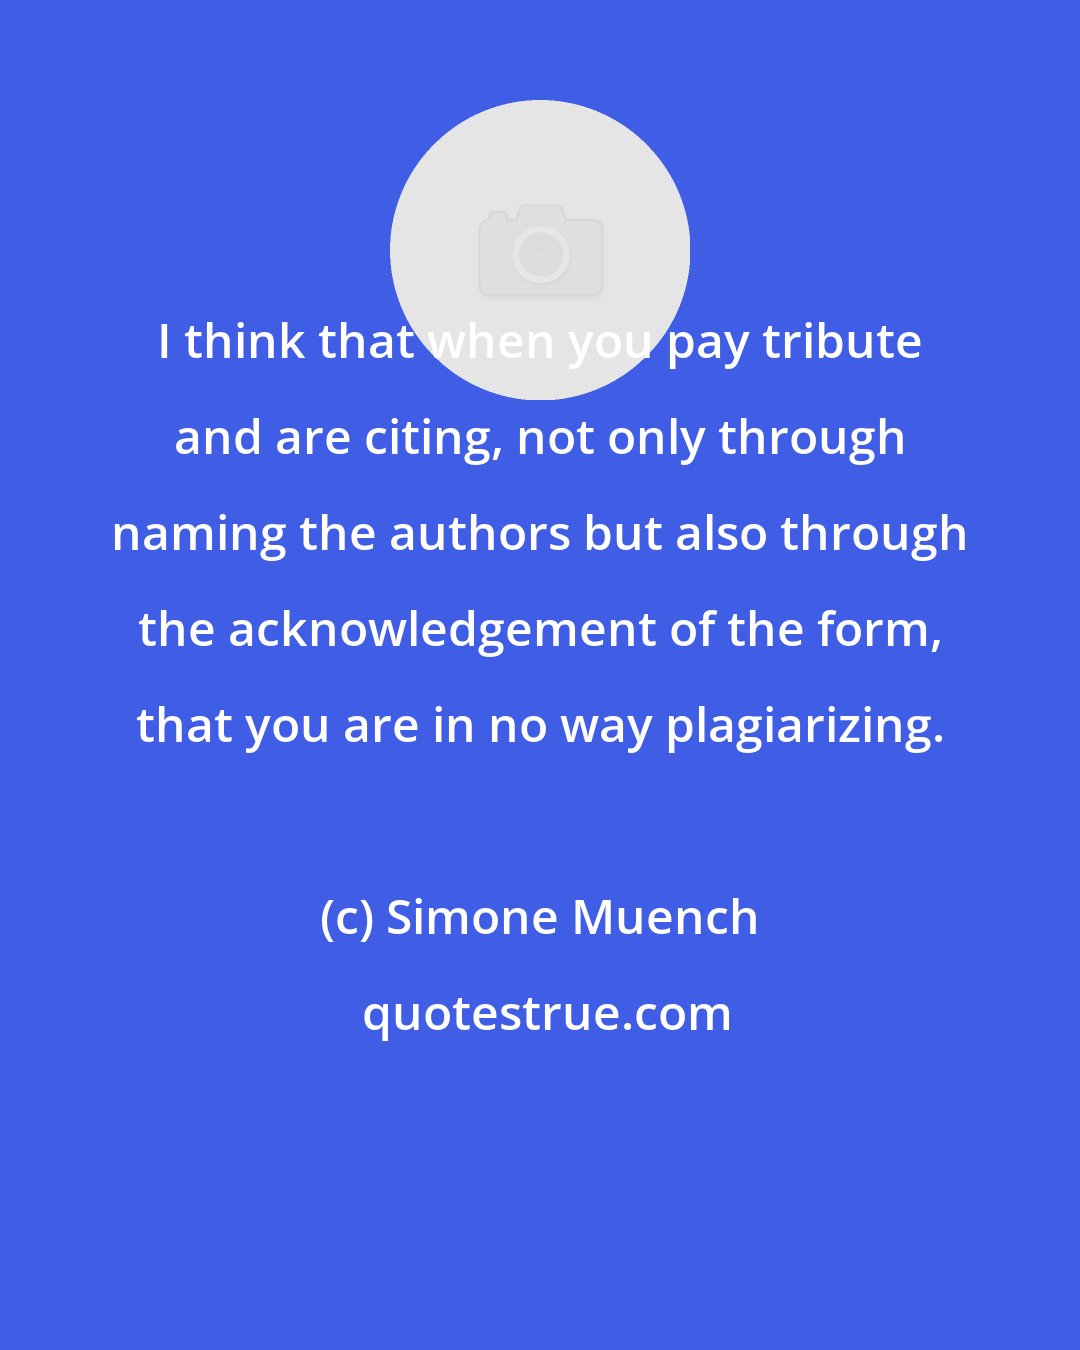 Simone Muench: I think that when you pay tribute and are citing, not only through naming the authors but also through the acknowledgement of the form, that you are in no way plagiarizing.